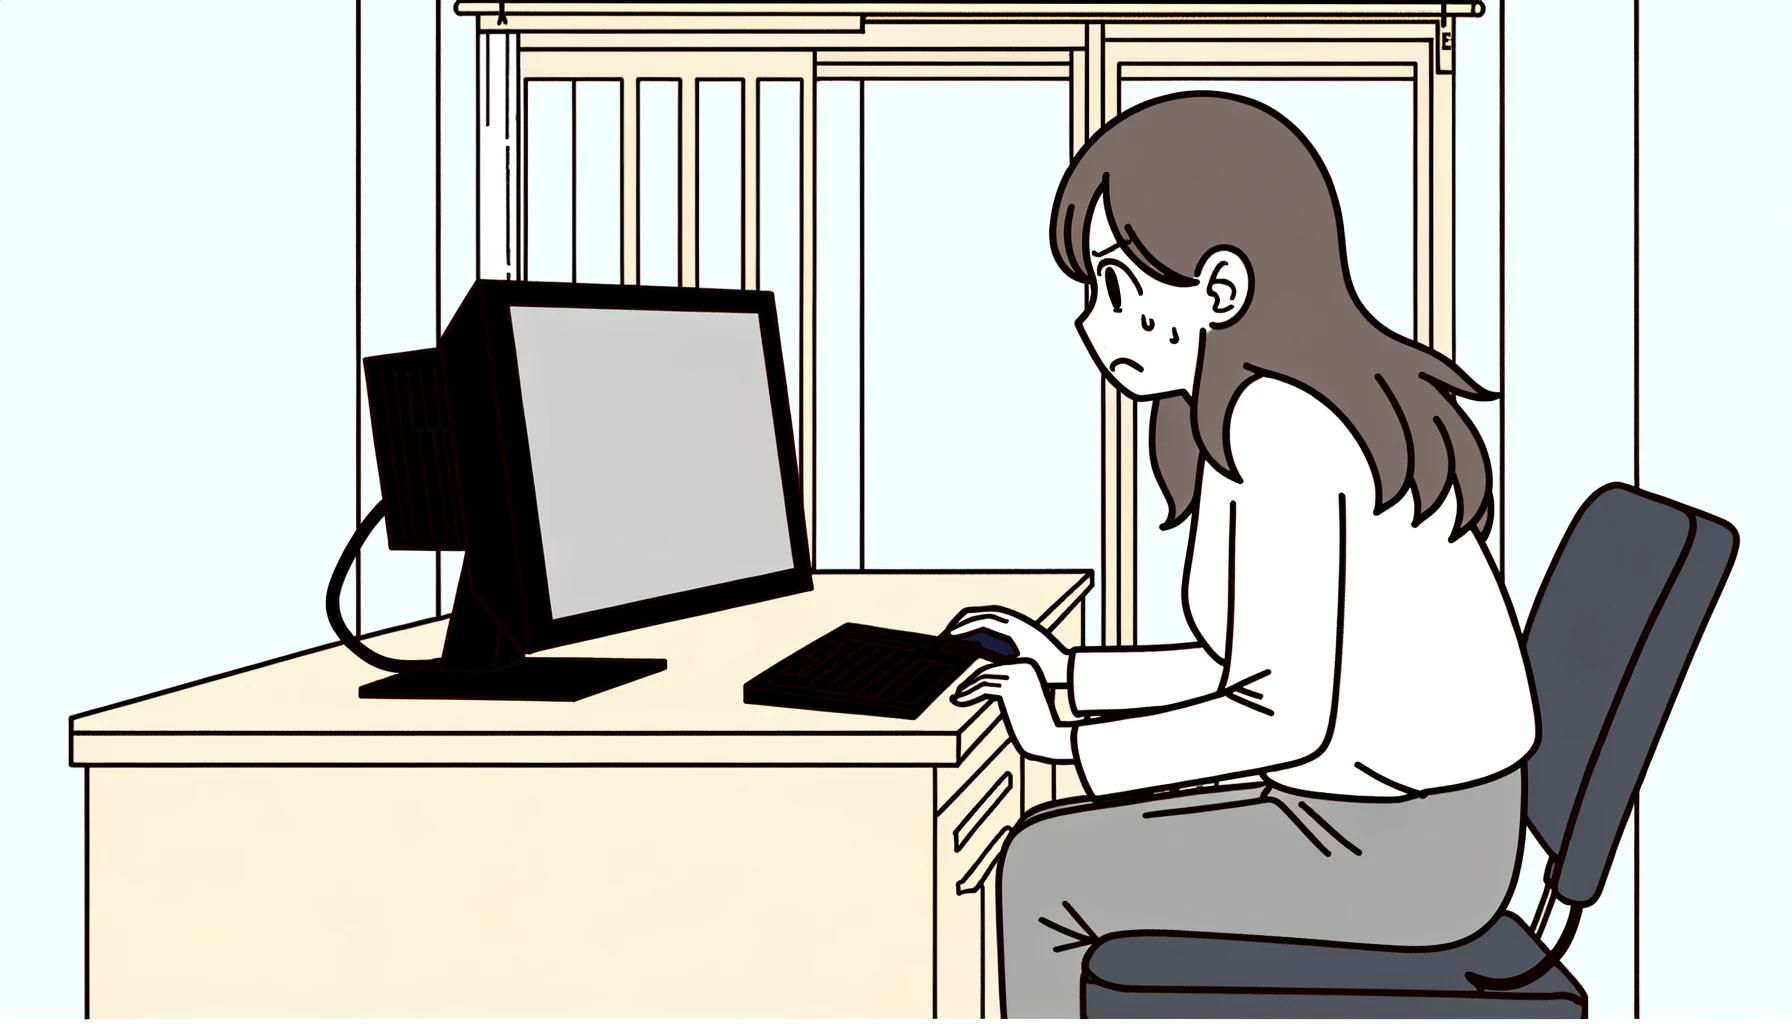 An illustration of a woman with semi-long black hair, looking frustrated and confused in front of a laptop, set in a home office. She is leaning forward towards the screen, trying to decipher the problem. The style is simple and clean, with minimal background details, focusing on the woman and the laptop. The illustration is wide and adopts a style reminiscent of vintage Japanese girl manga, using bright, almost primary colors (marker, pastel colors) to effectively convey the scene's dynamism and expressiveness.